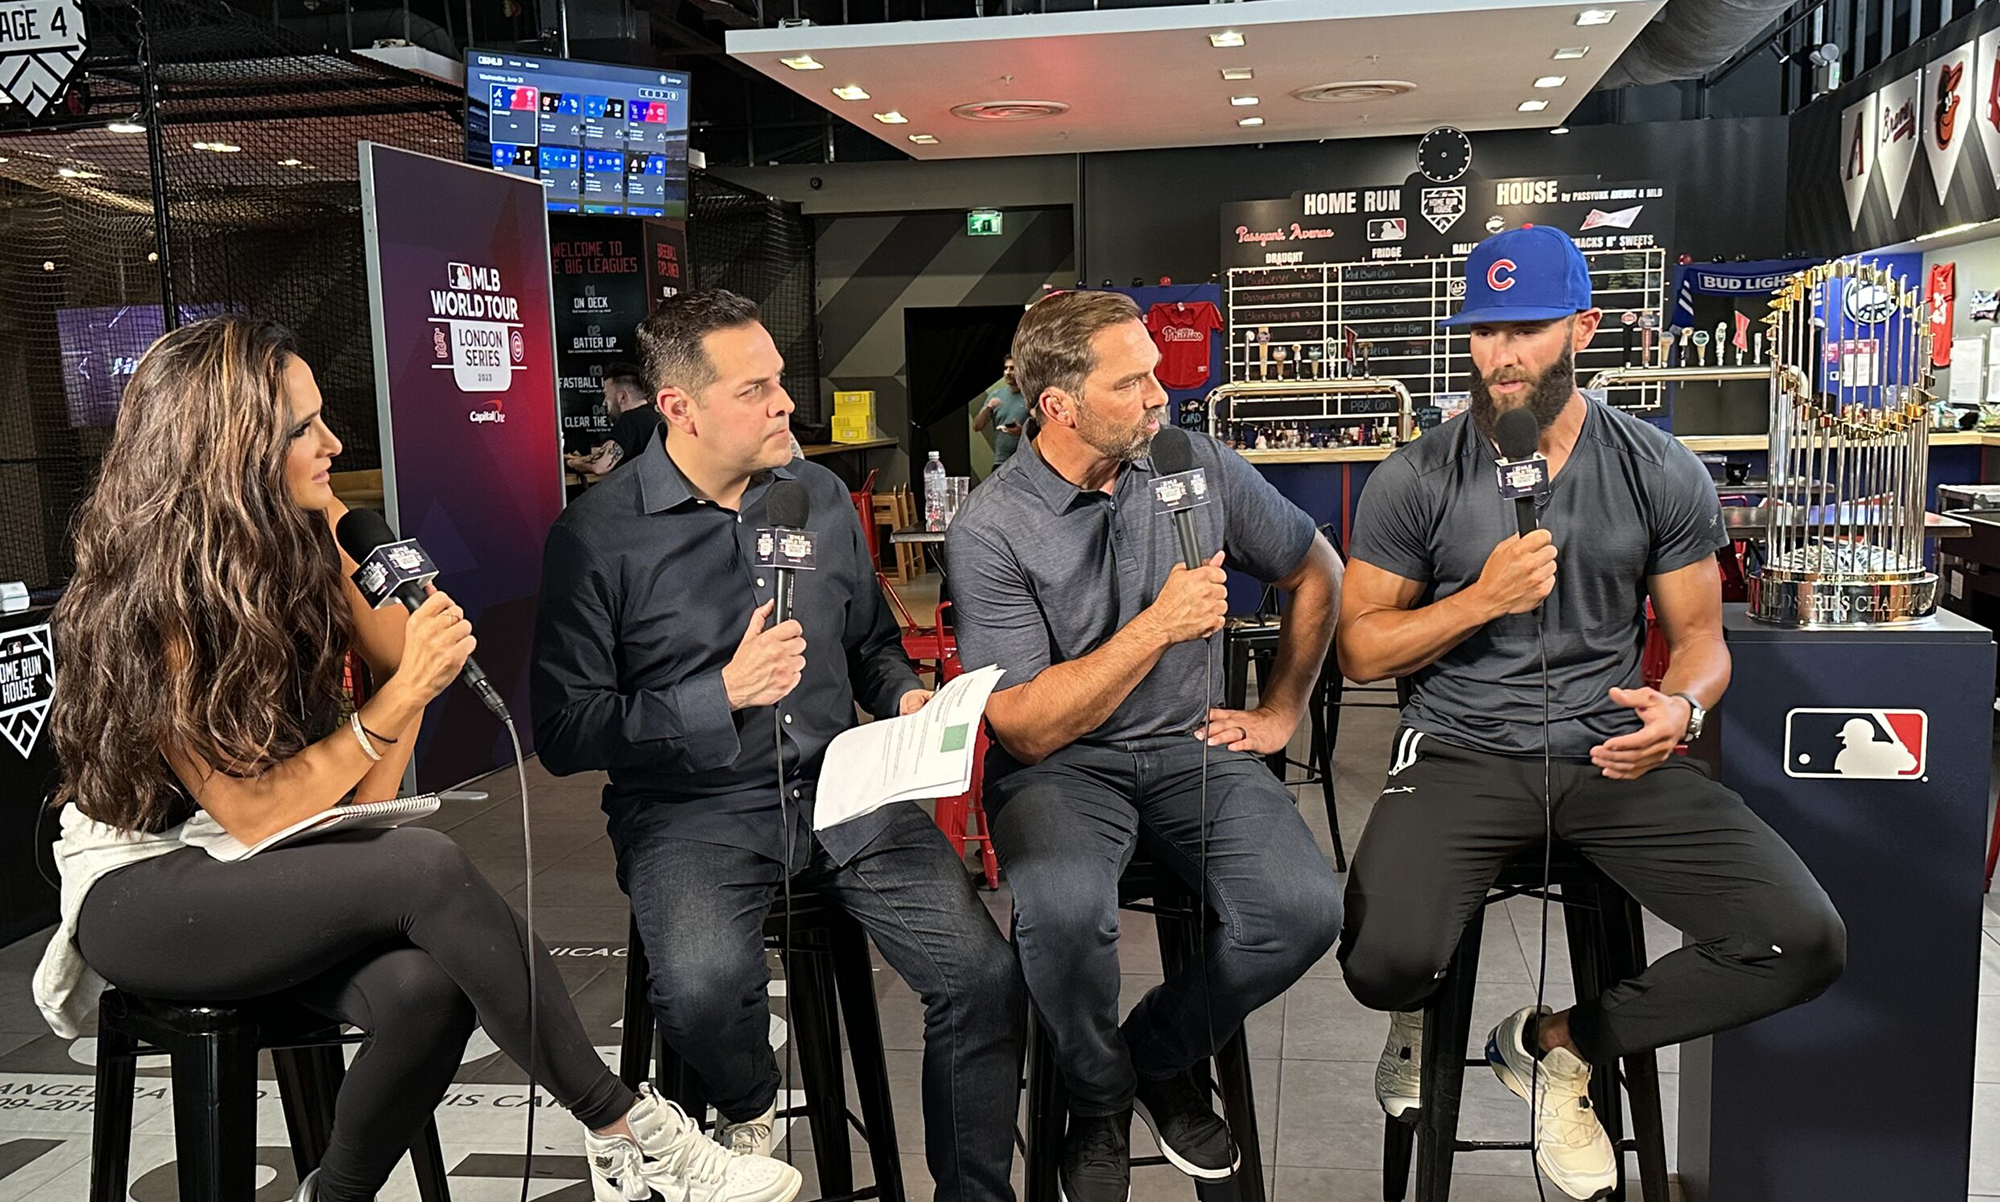 On Deck: 2023 MLB London Series: St. Louis Cardinals vs. Chicago Cubs from  London Stadium Airs Exclusively on ESPN on June 25 - ESPN Press Room U.S.